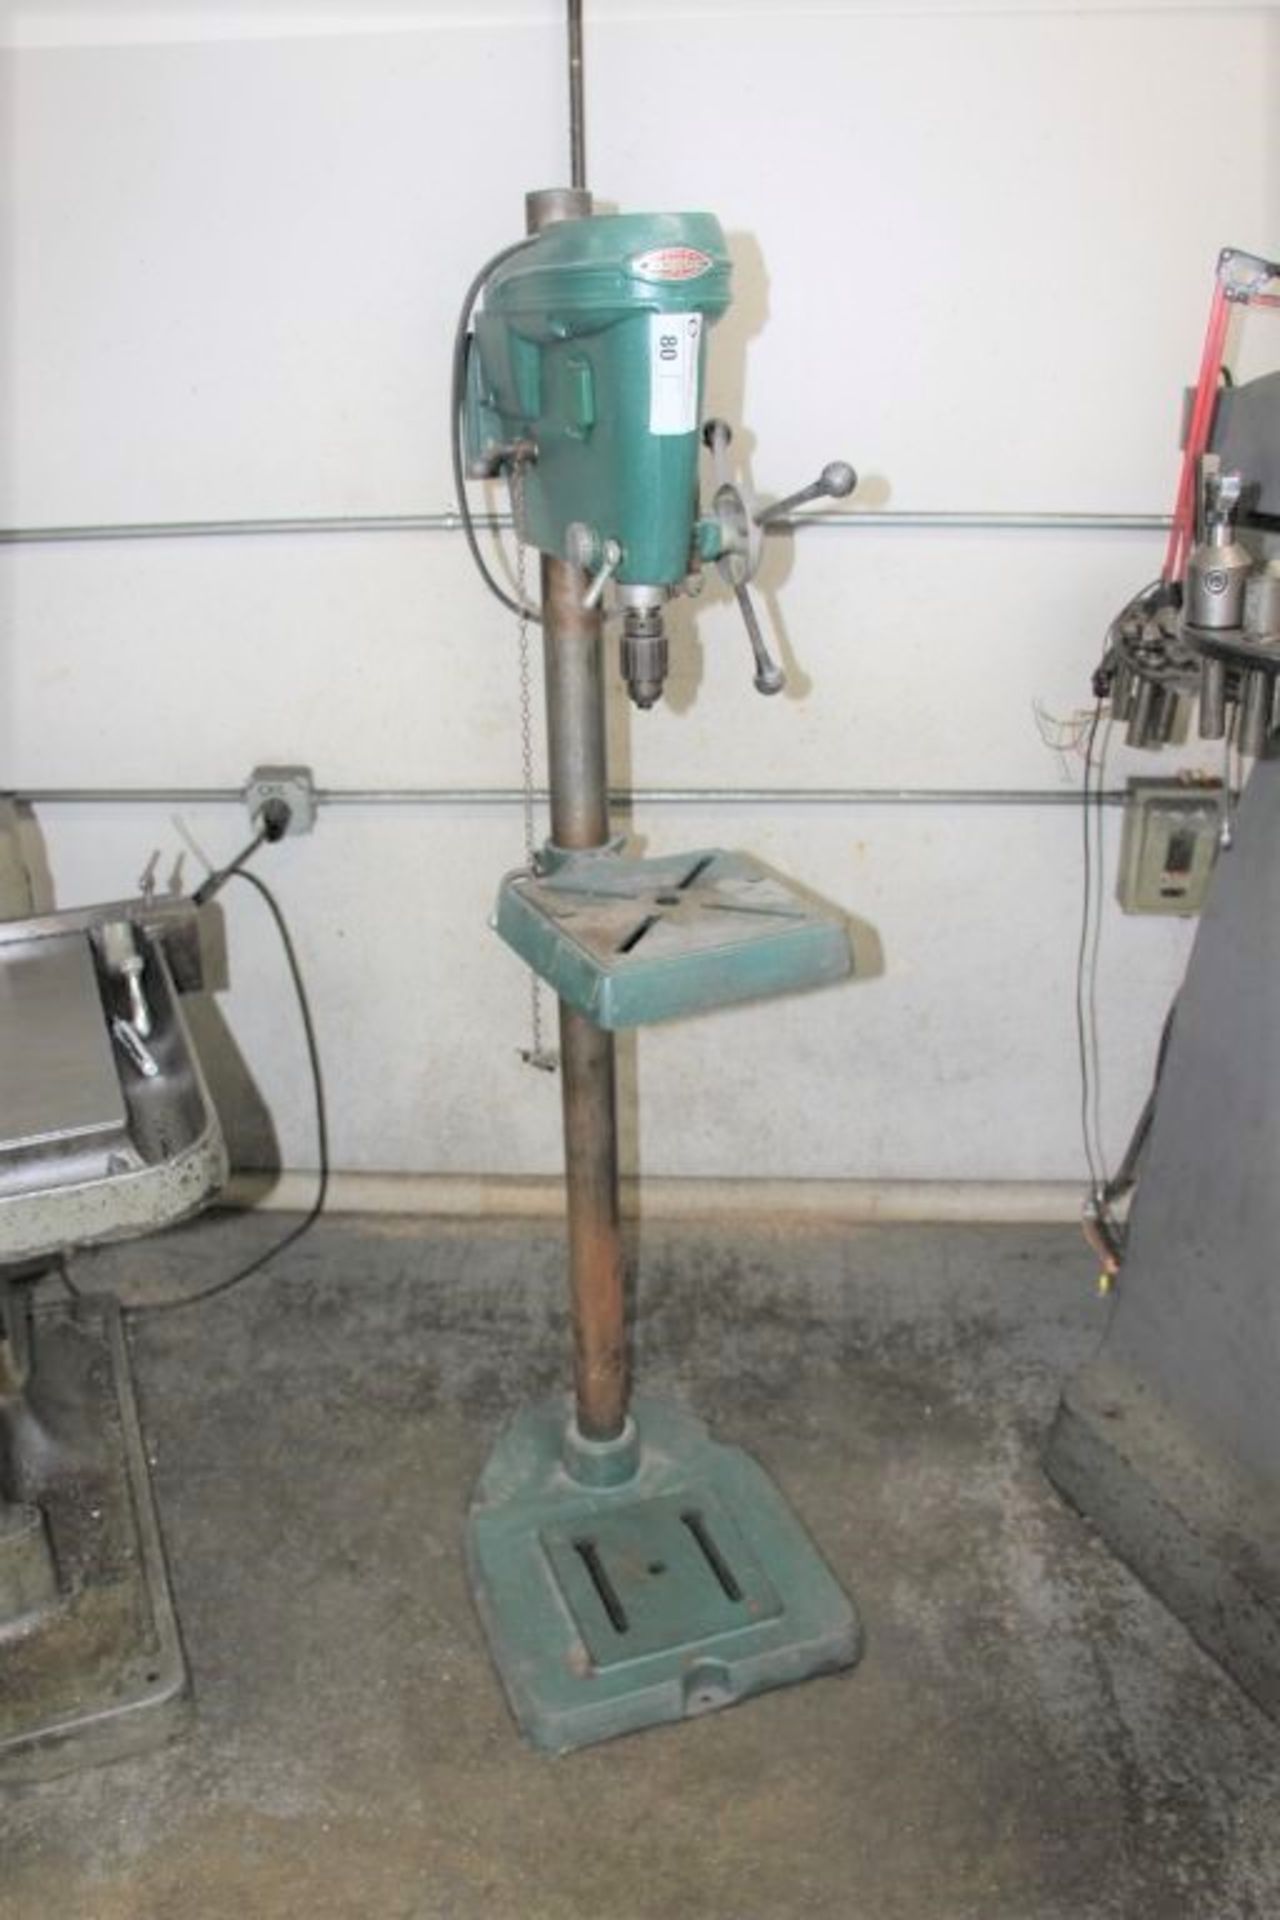 Craftsman drill press, made by King Seeley Corp.